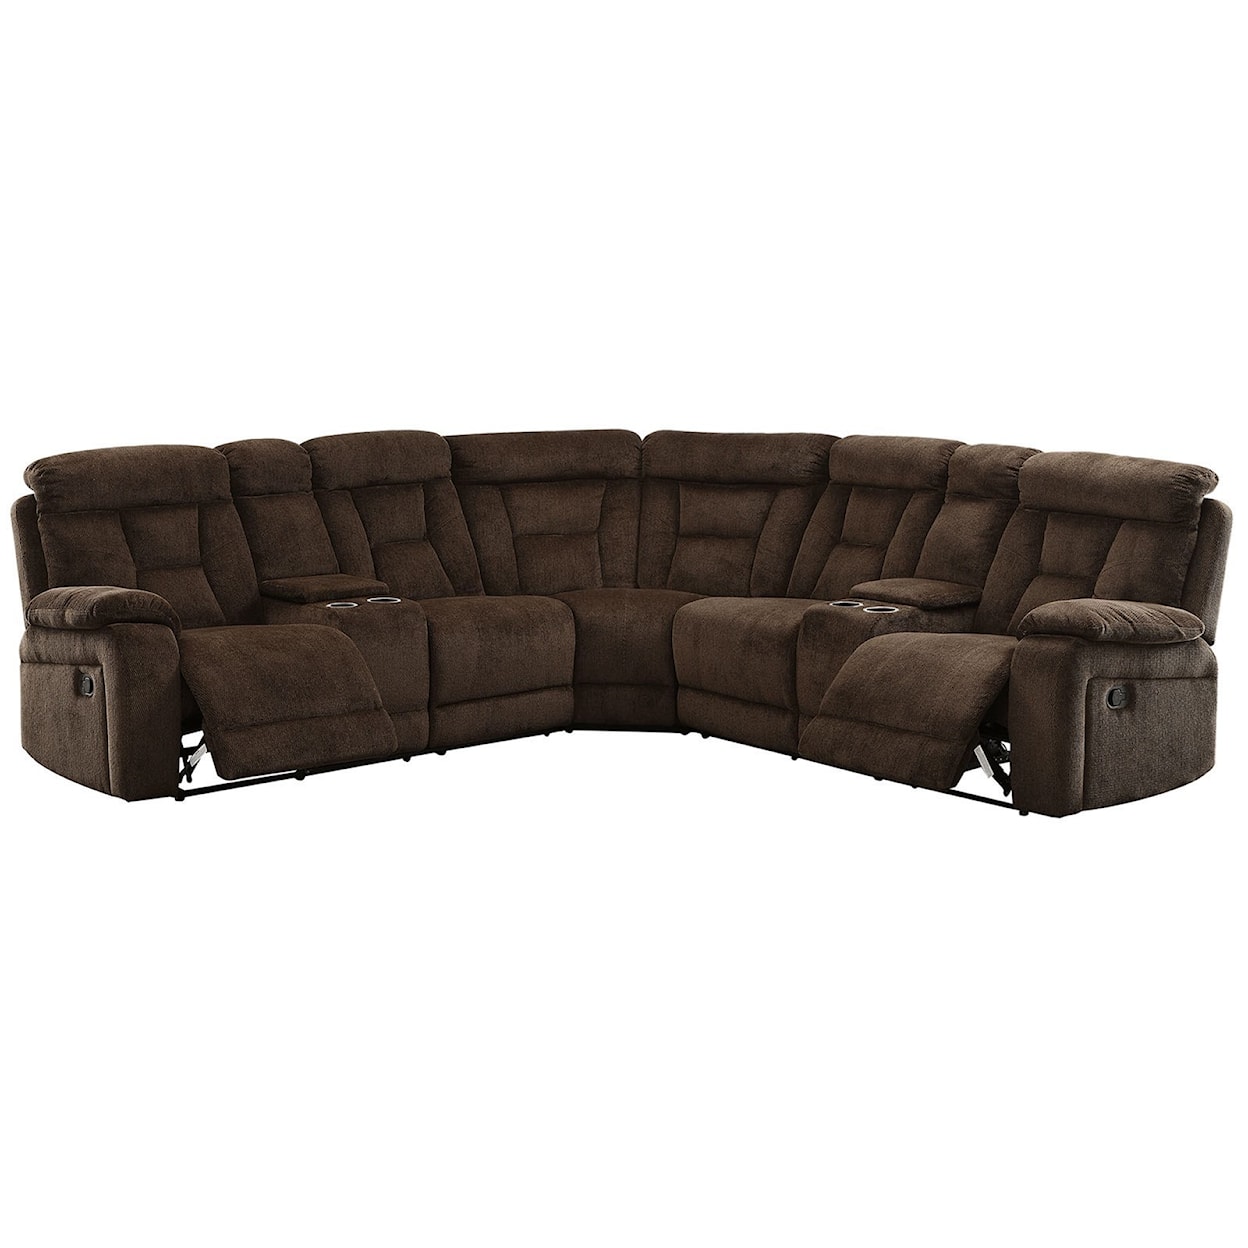 FUSA Maybell Sectional